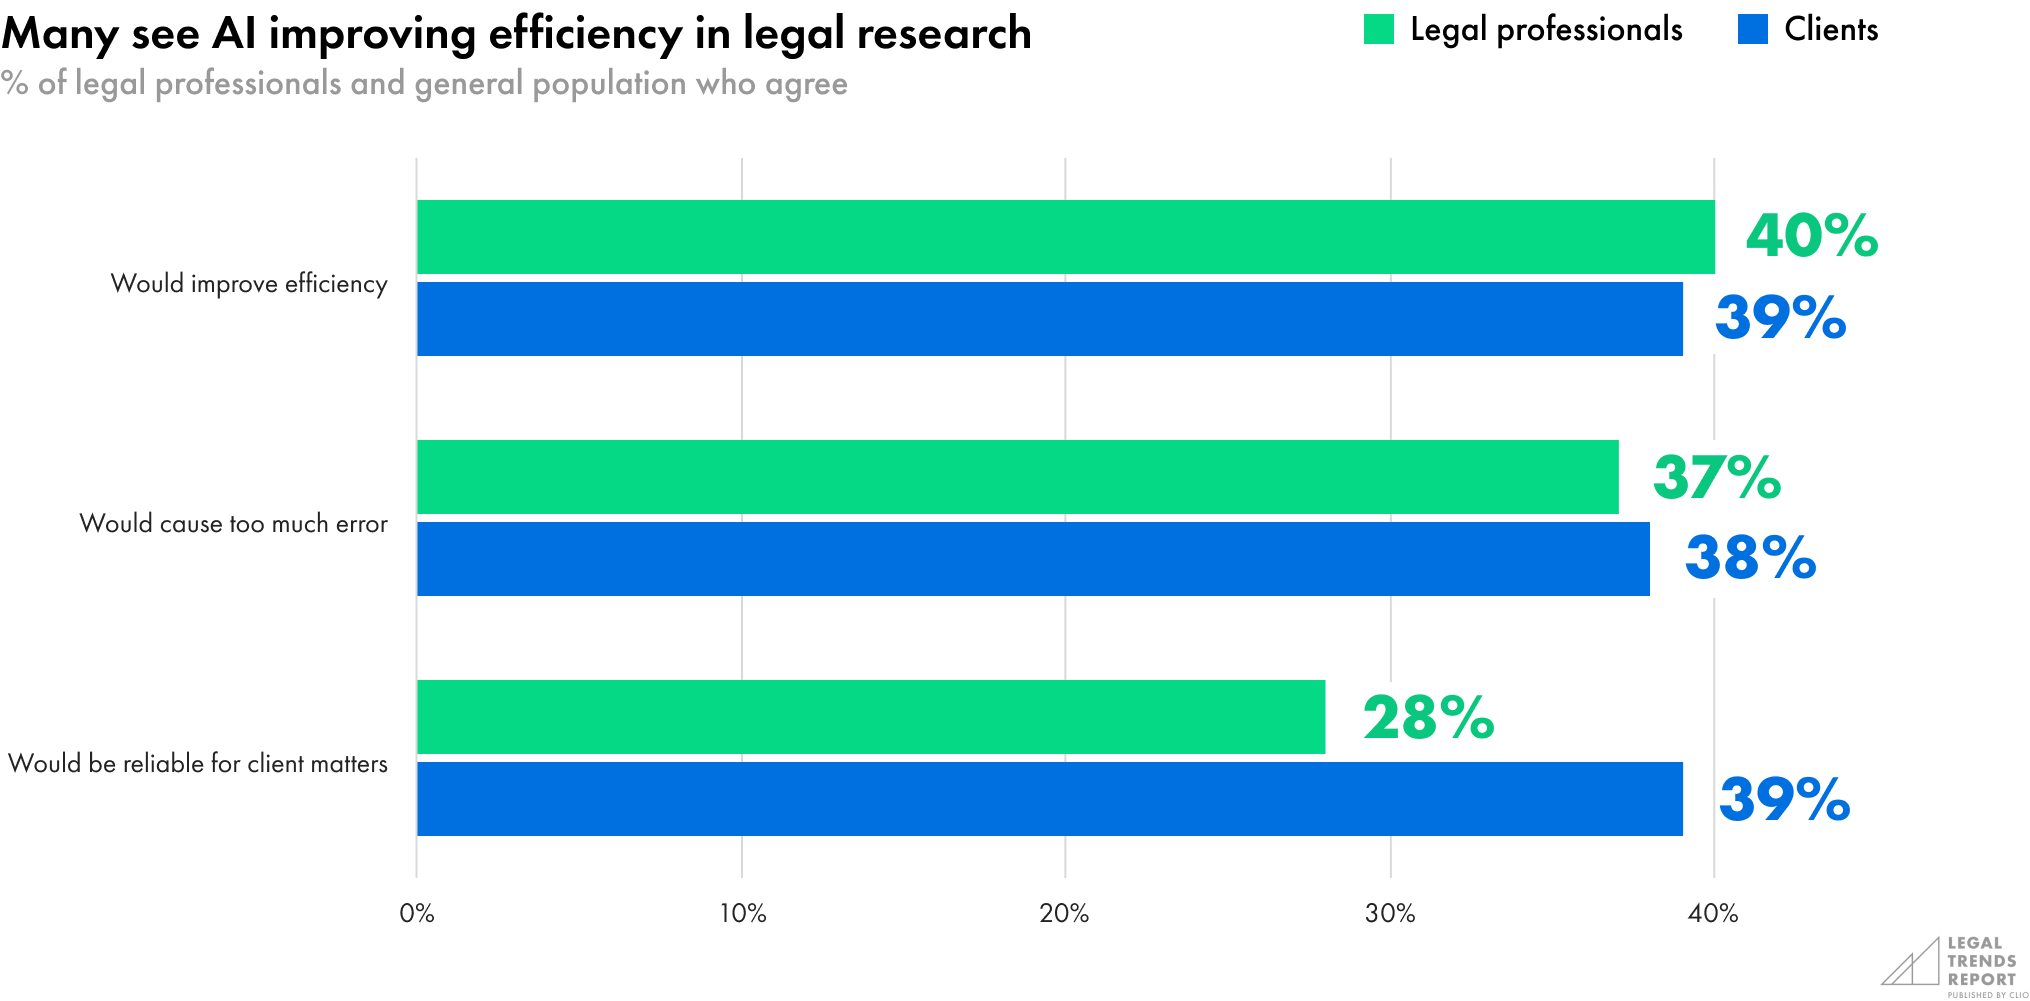 Many see AI improving efficiency in legal research